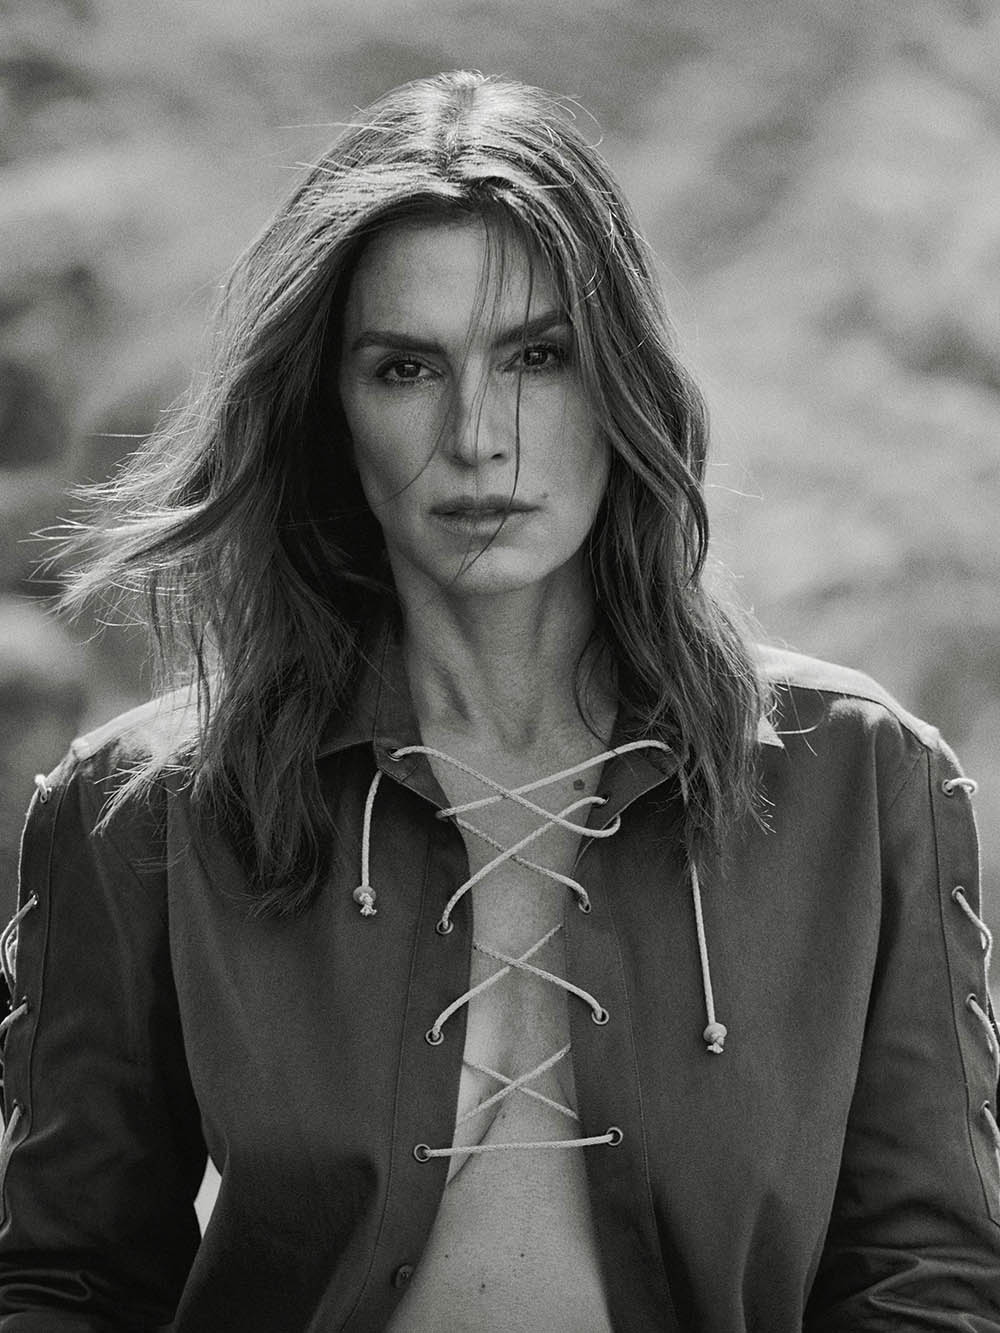 Cindy Crawford covers Porter Edit March 1st, 2019 by Zoey Grossman